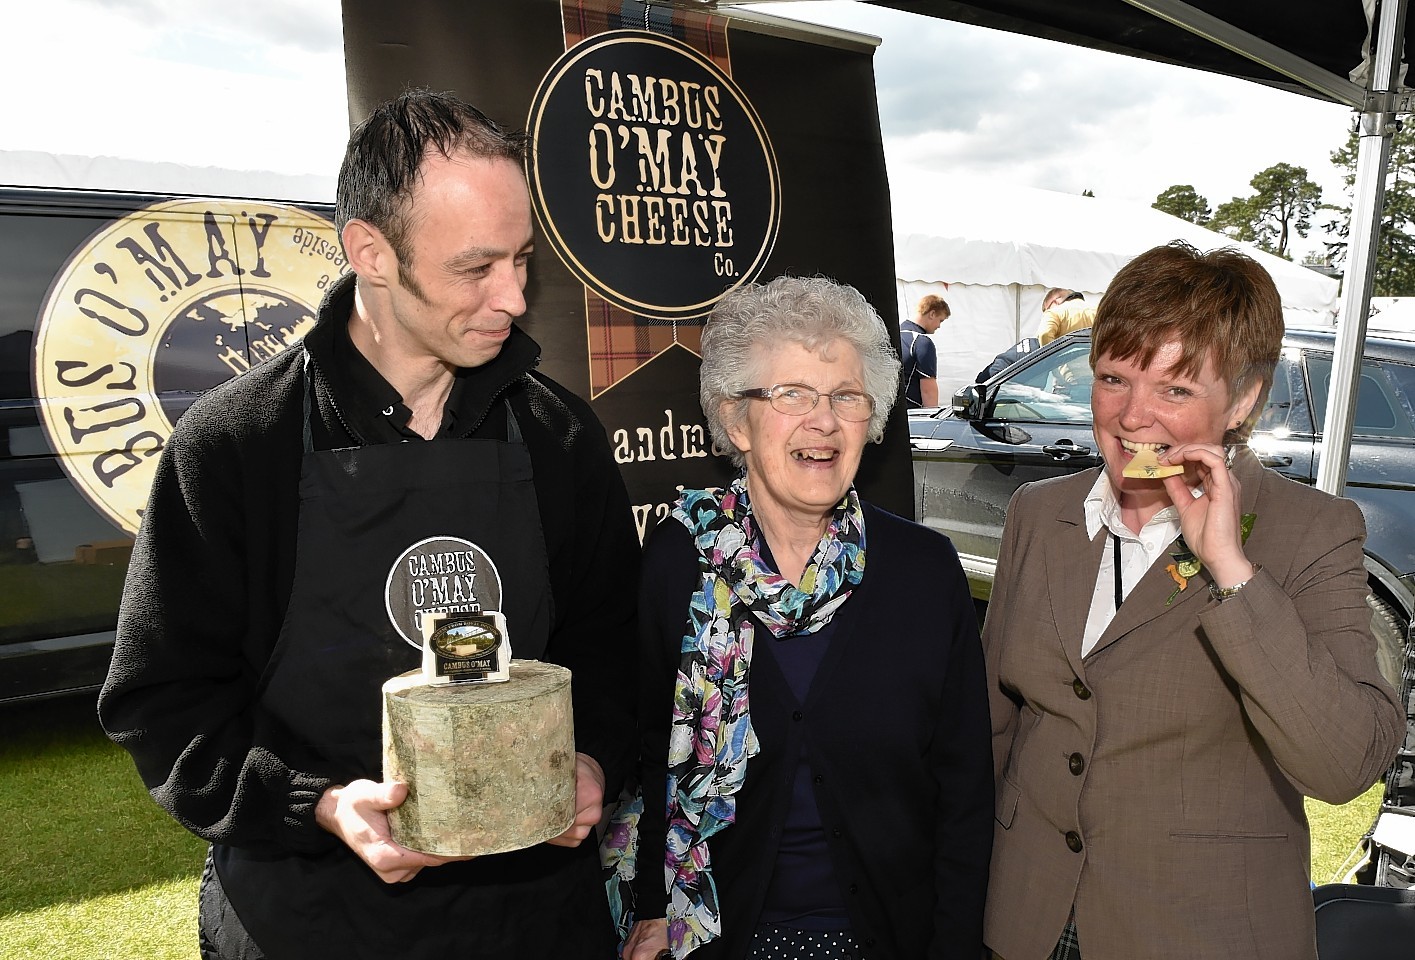 Aboyne secretary Morag McBeath (right) with cheesemaker James Reid and Barbara Reid. Picture by Colin Rennie